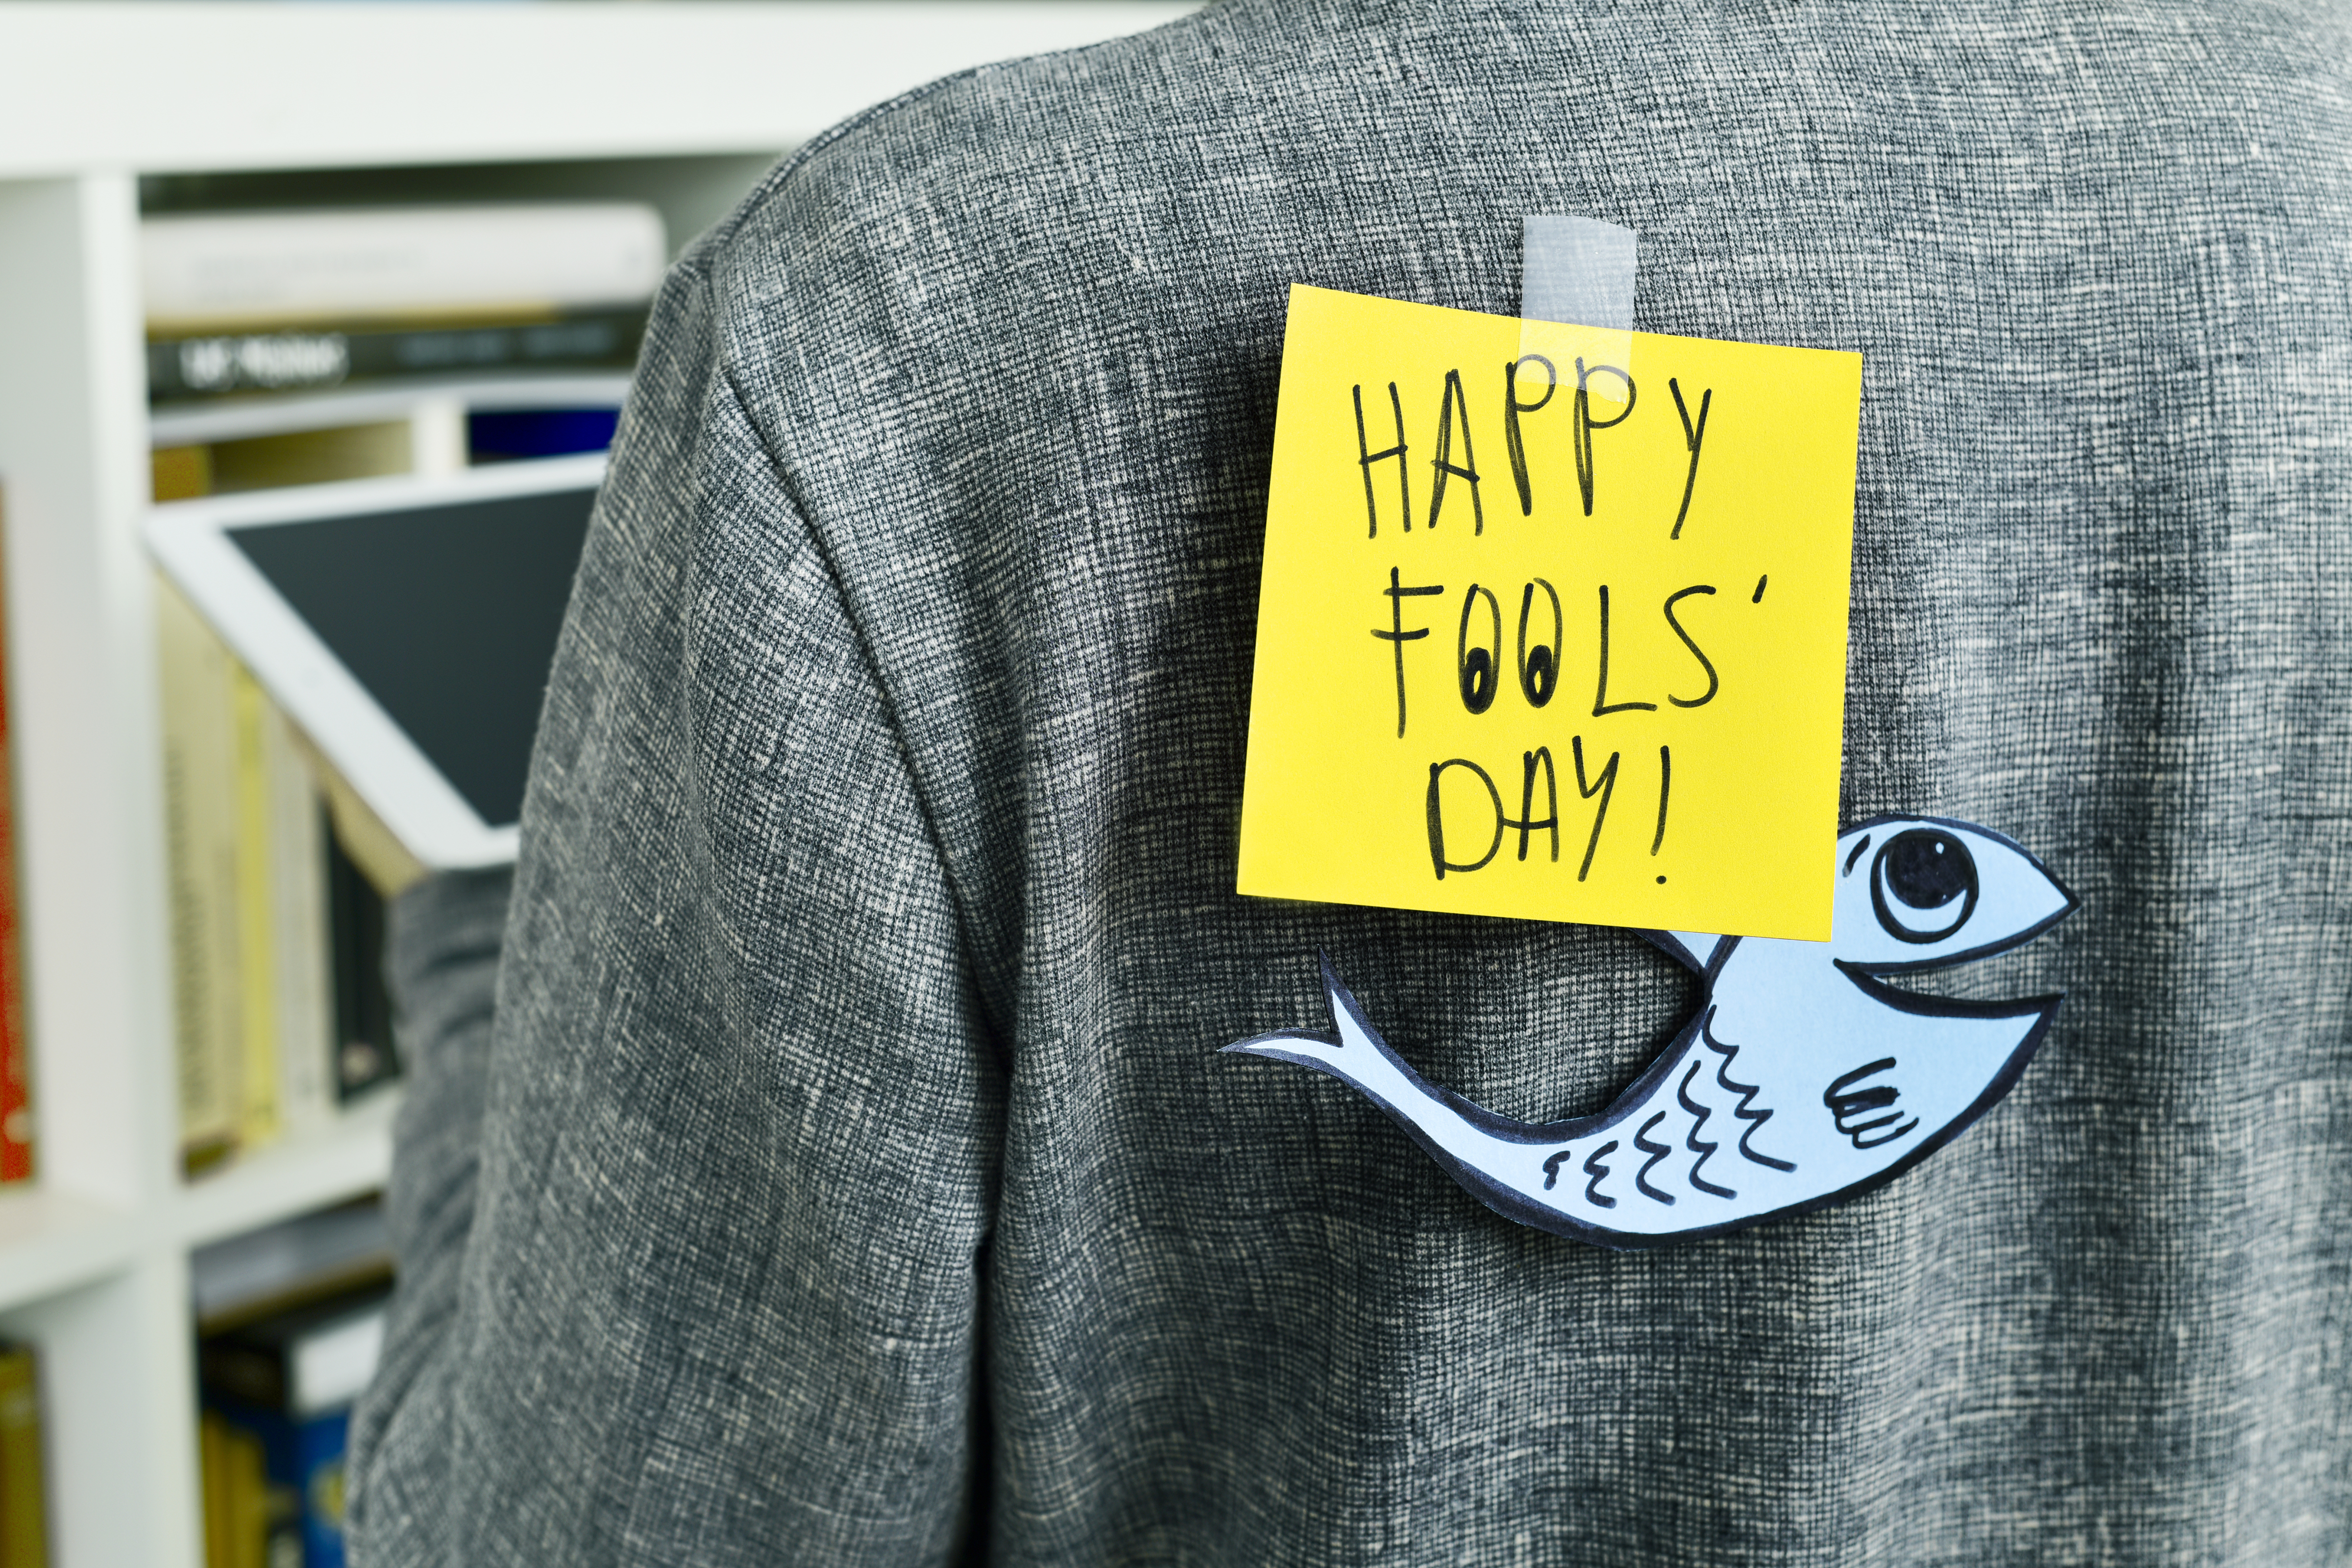 april fools day quotes sayings